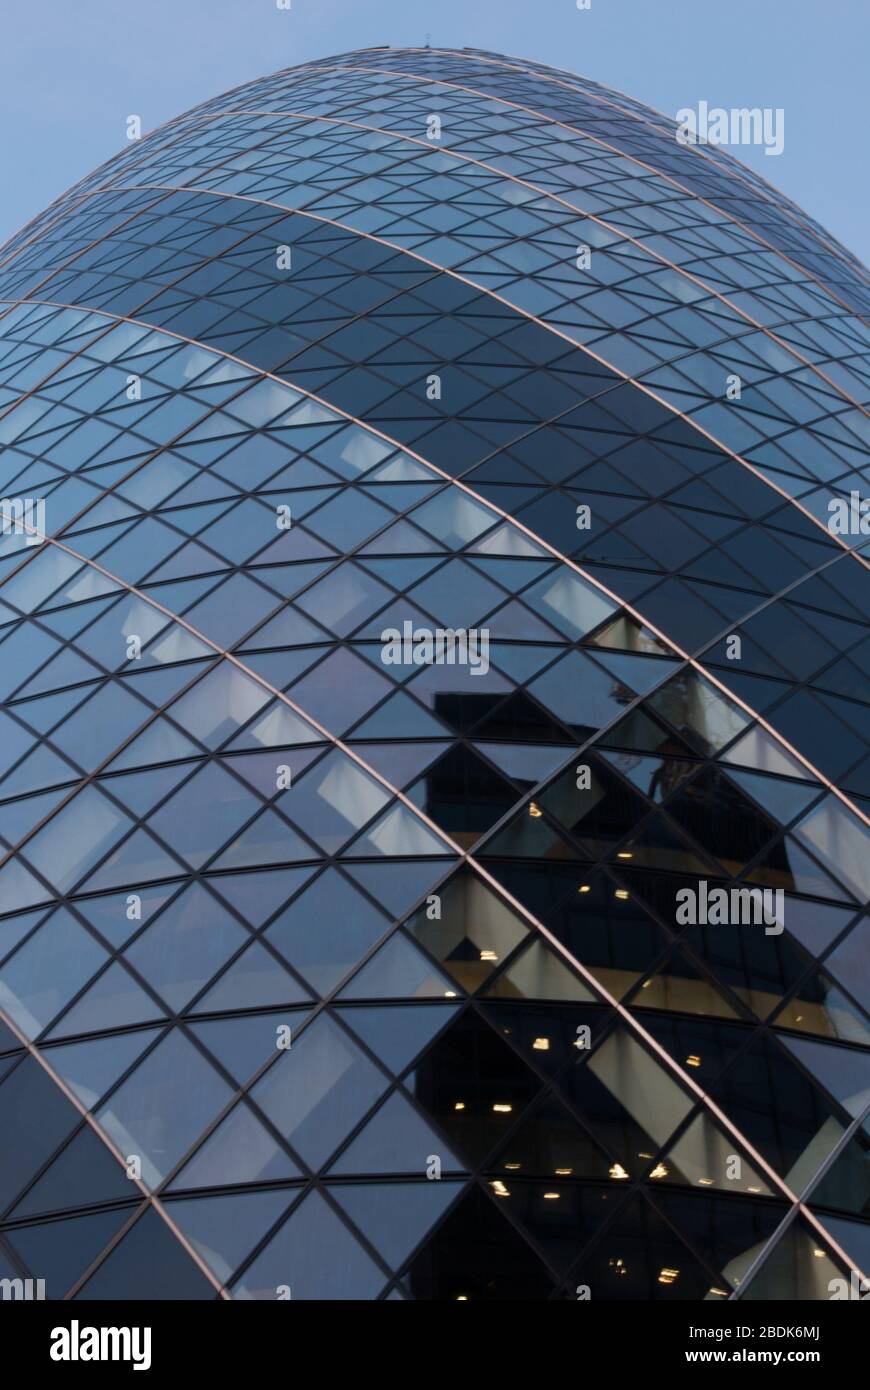 Blue Tower The Gherkin Swiss Re Building 30 St Mary Axe, London EC3A 8BF by Foster & Partners Stock Photo